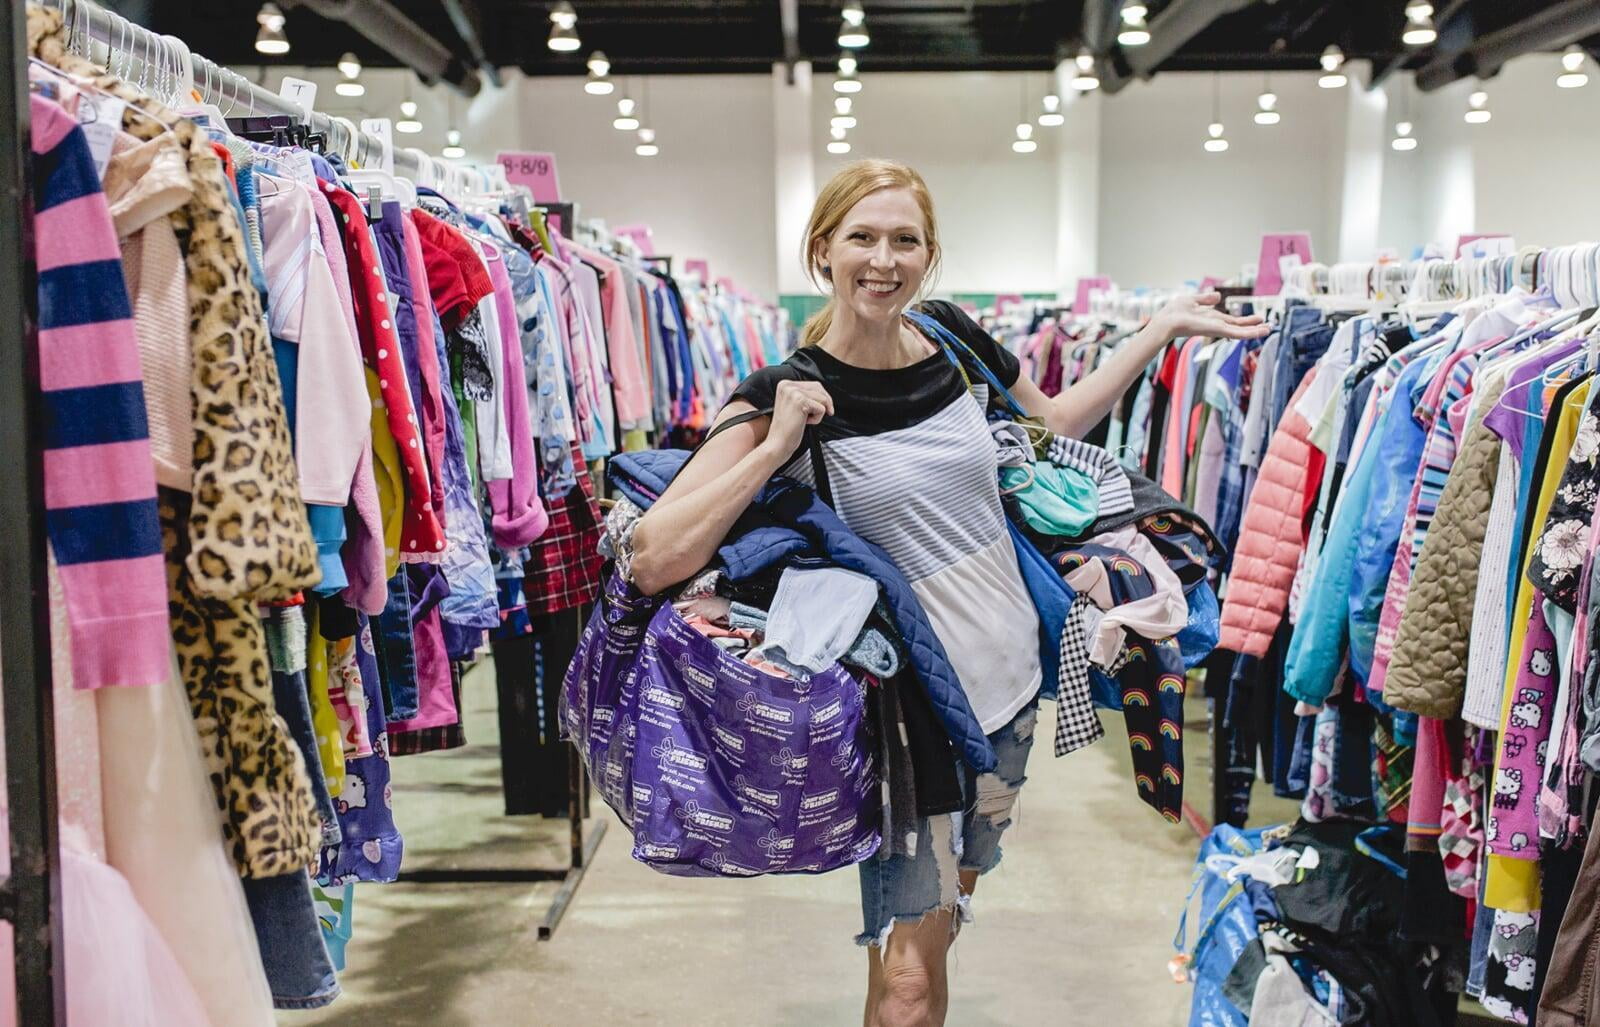 A young JBF shopper mom in a black Metallica T-shirt holds an outfit she intends to buy at her local JBF sale.